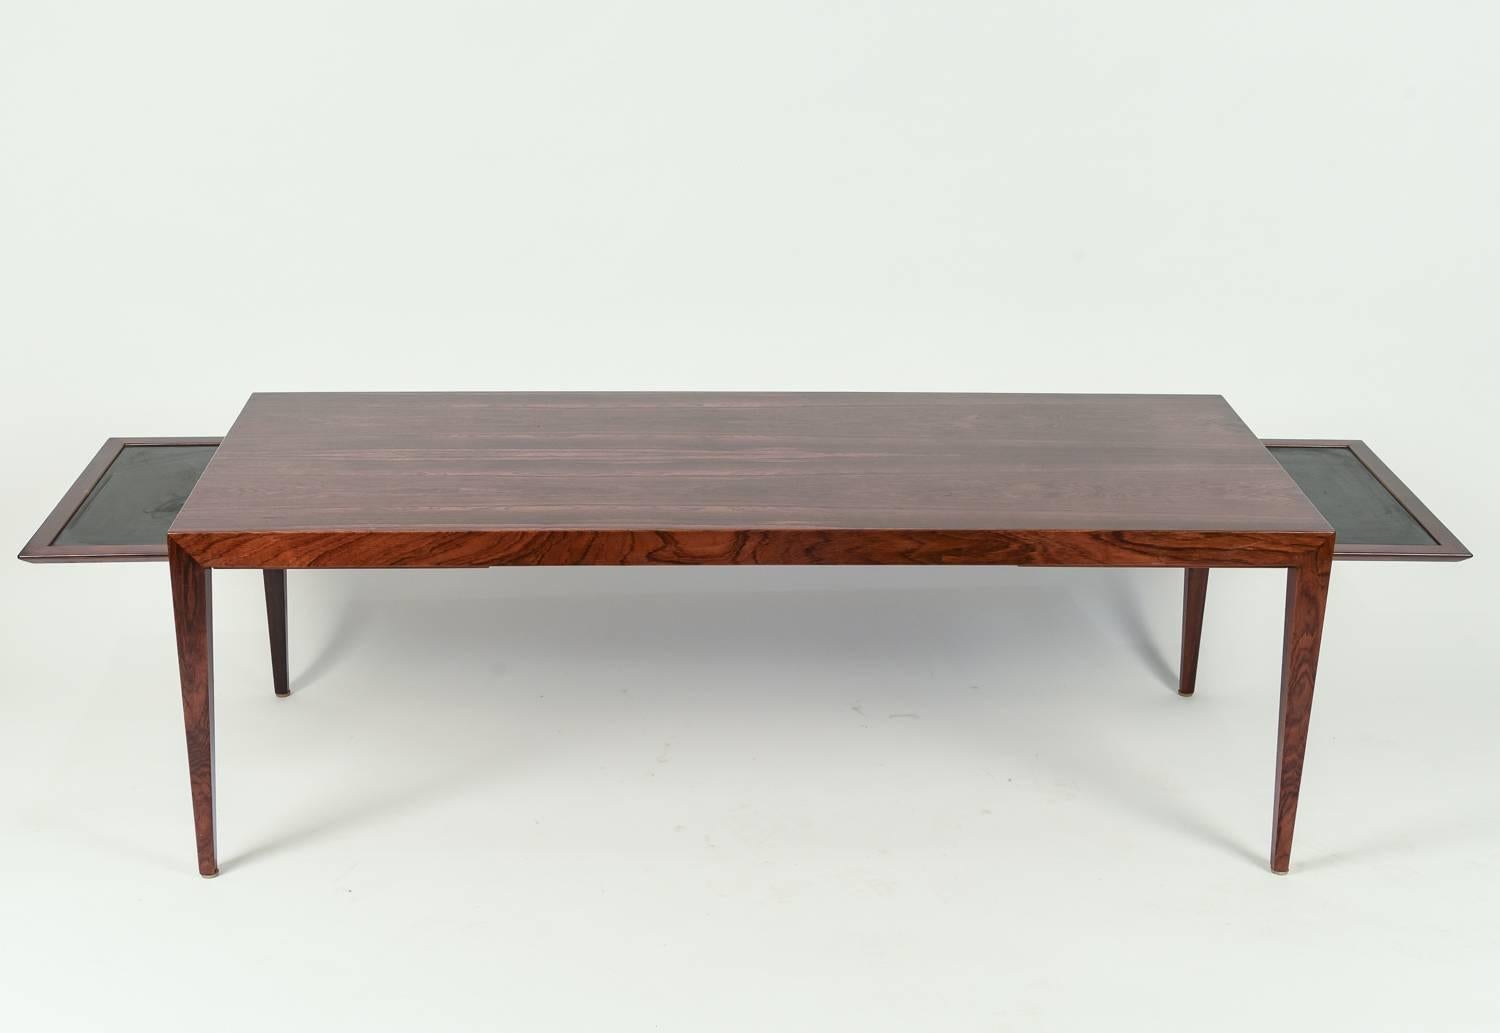 This Danish midcentury coffee table designed by Severin Hansen for Haslev features two pullout extensions on either side. A great daily piece that can be altered to accommodate guests. Crafted of handsome rosewood and is a great example of Severin